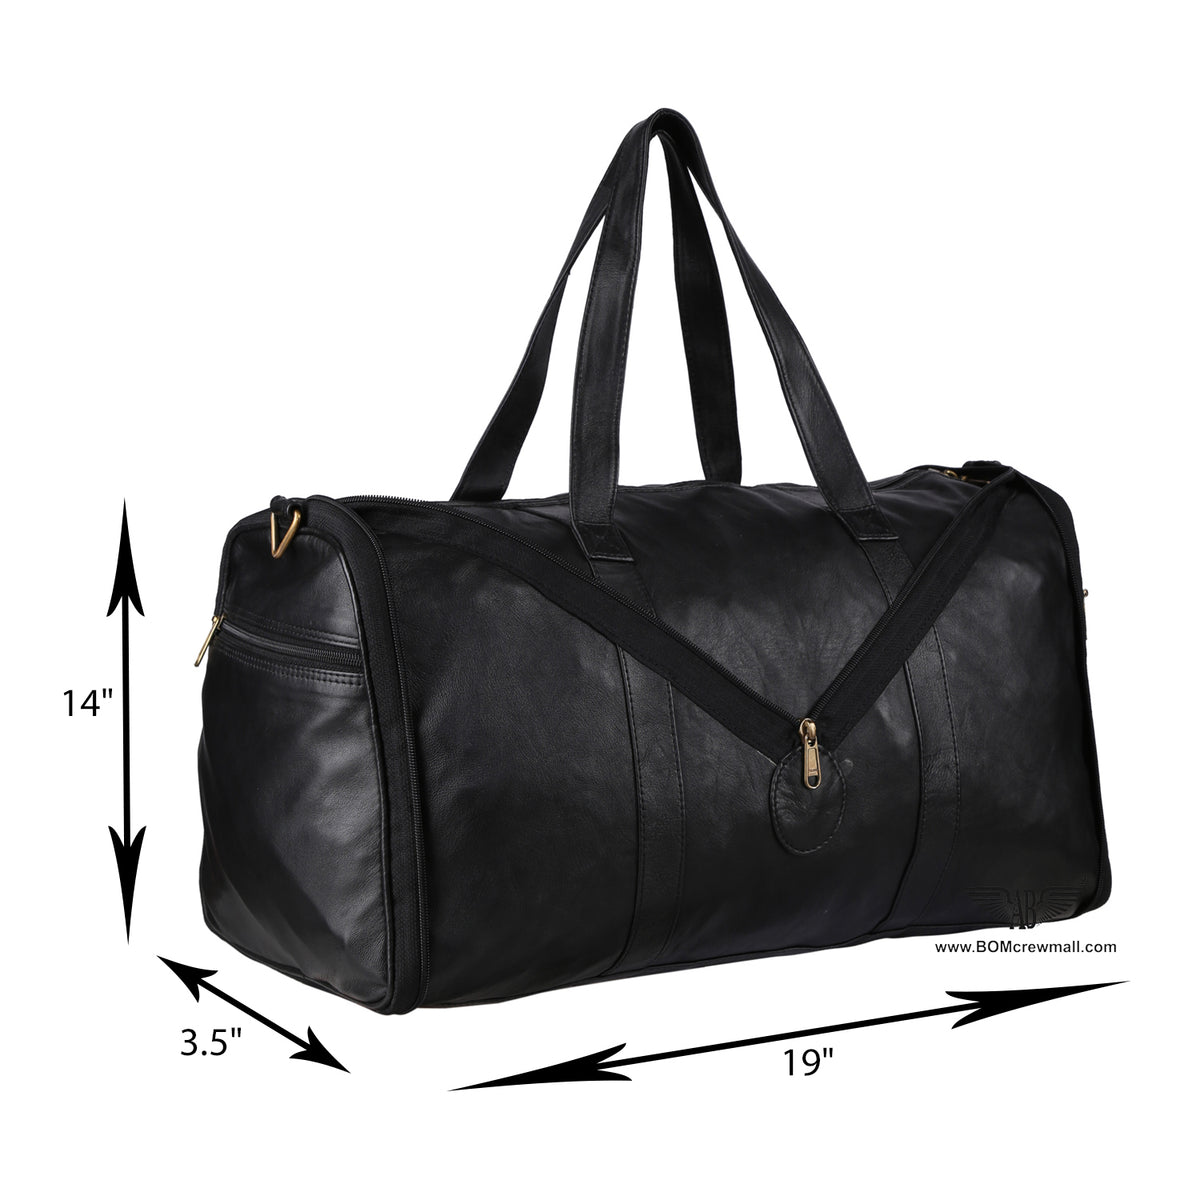 Dimensions of FOLDING TOTE BAG. It is also used as a leather gym bag